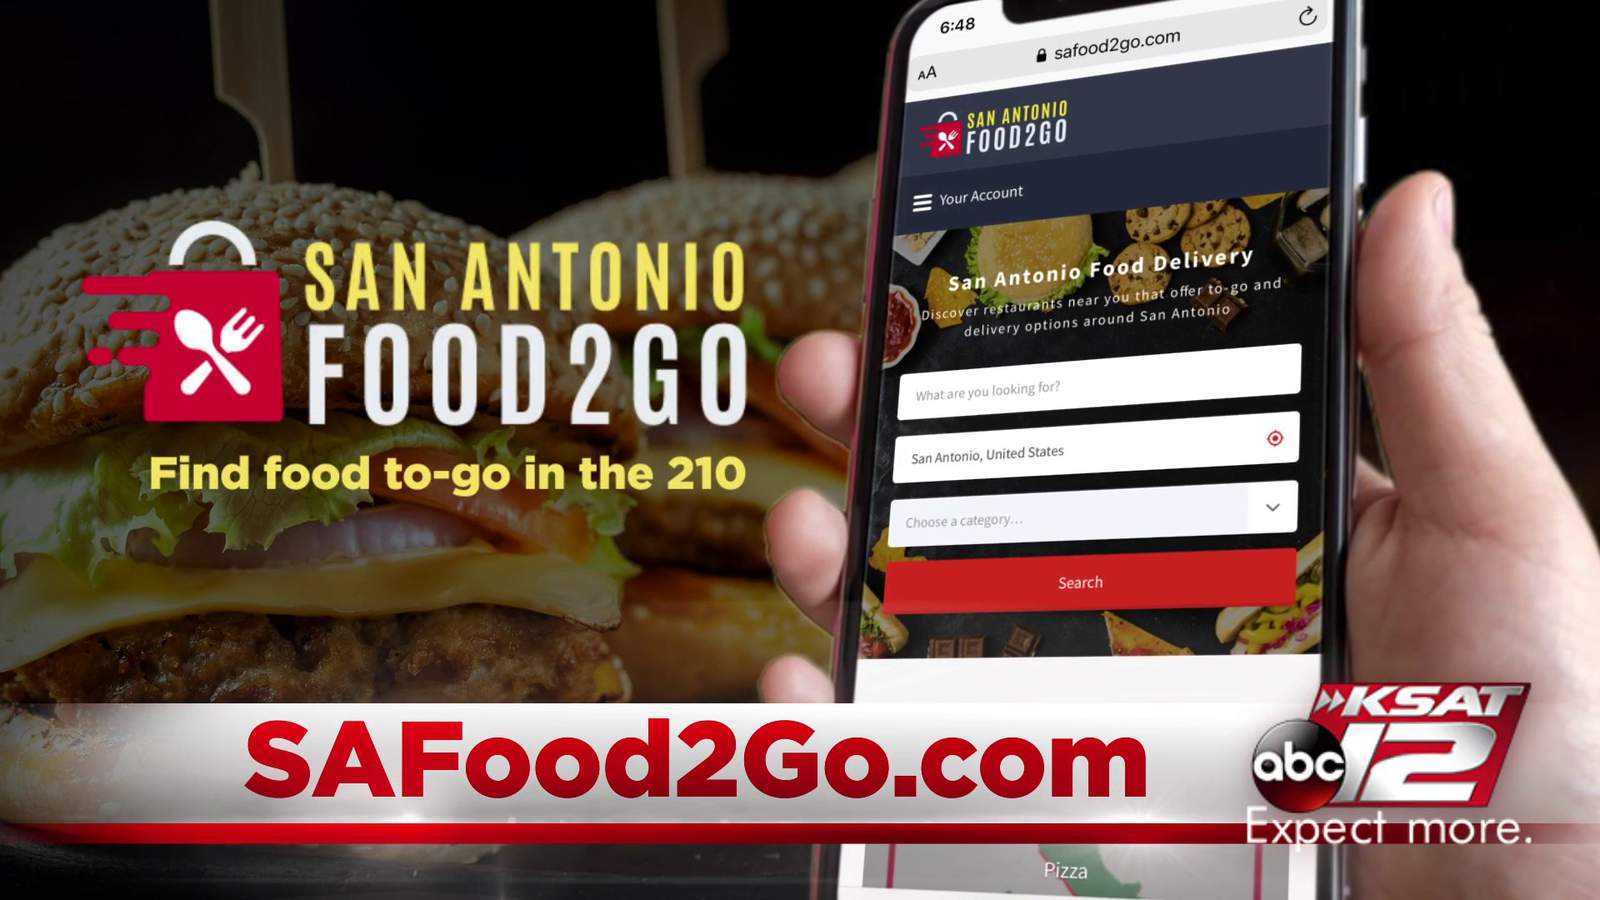 Search nearby restaurants offering to-go, delivery around San Antonio with ‘SA Food 2 Go’